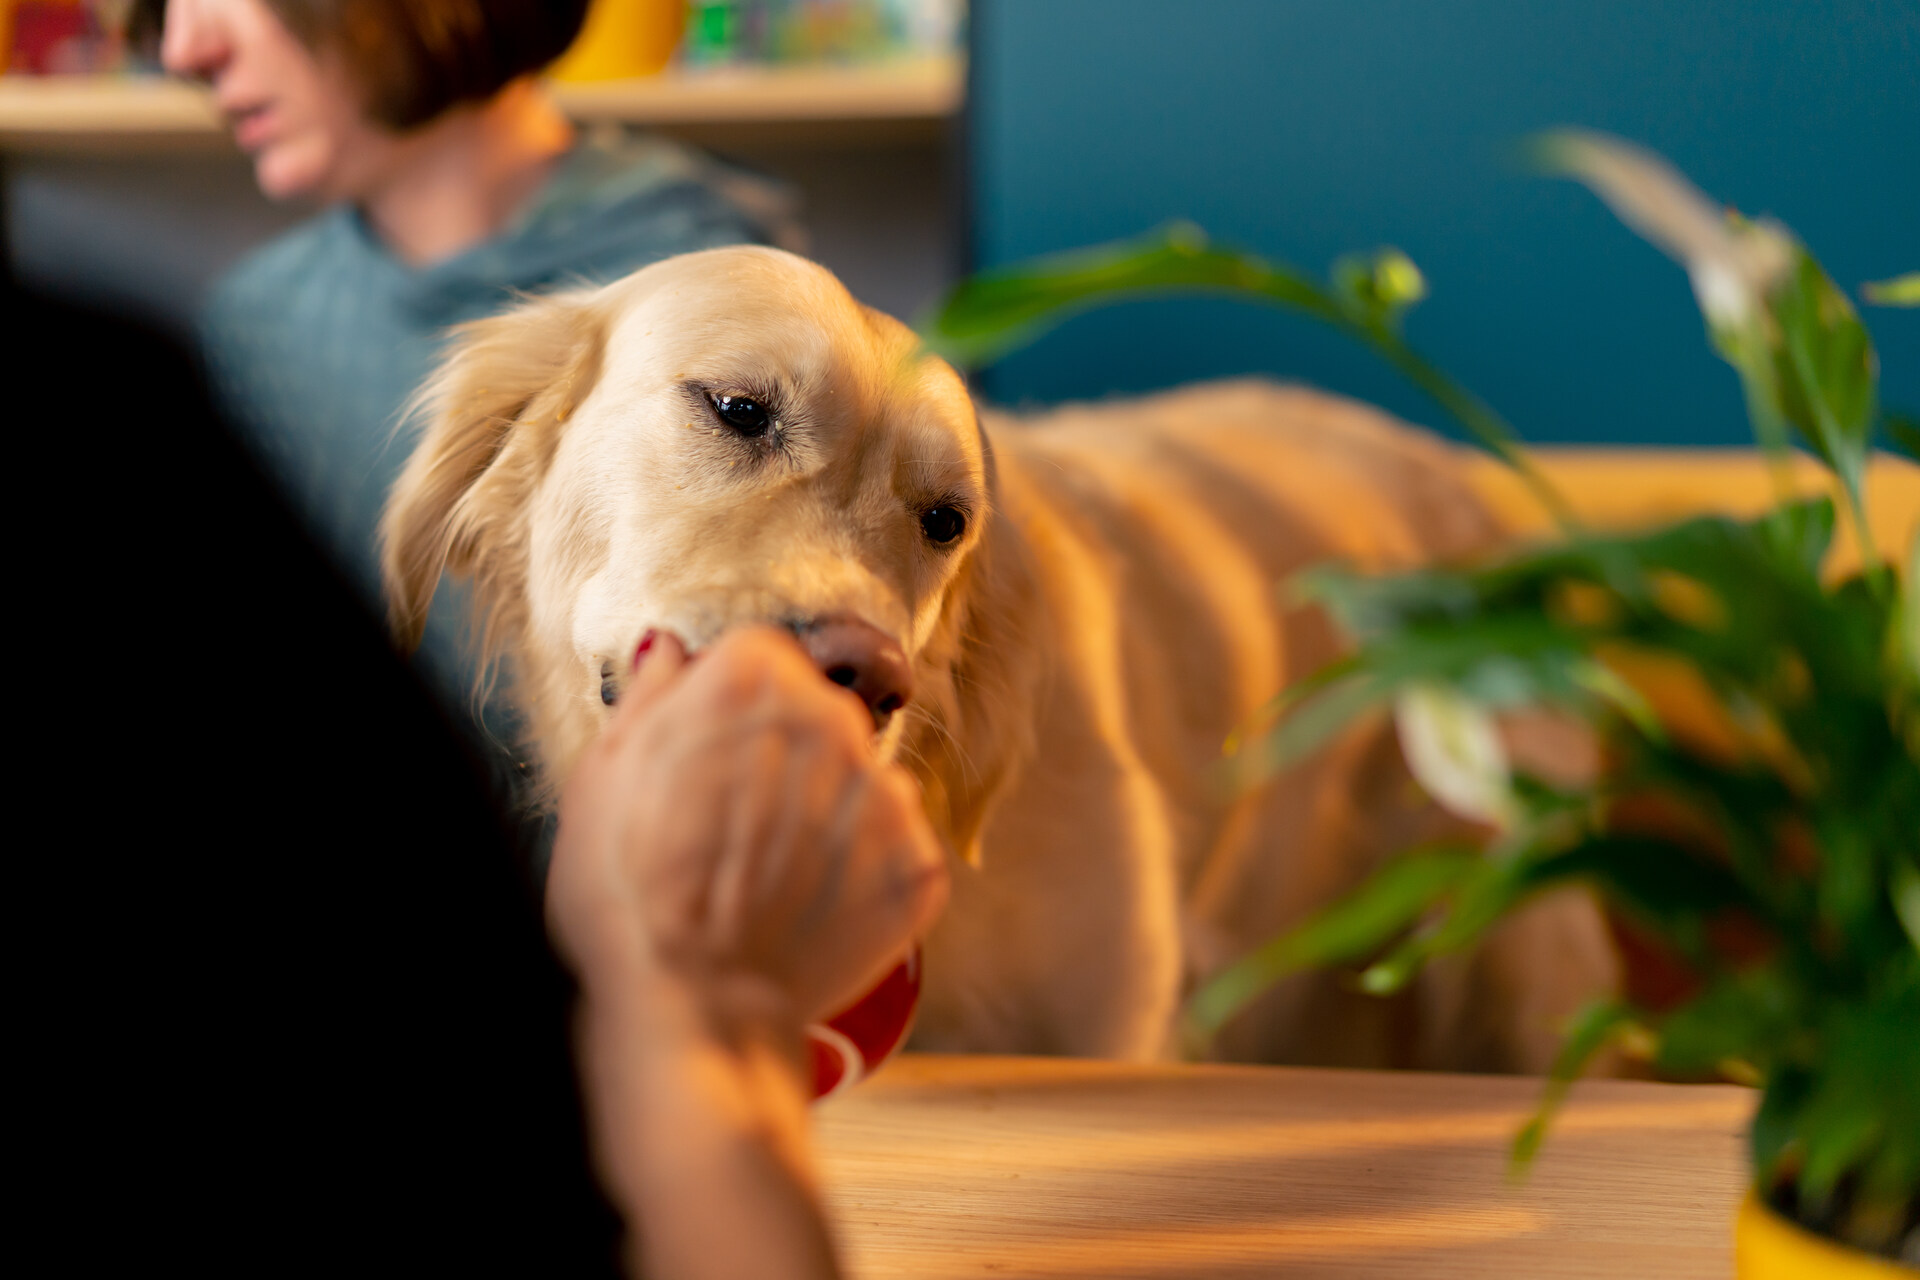 A dog sniffing a treat in a woman's hand